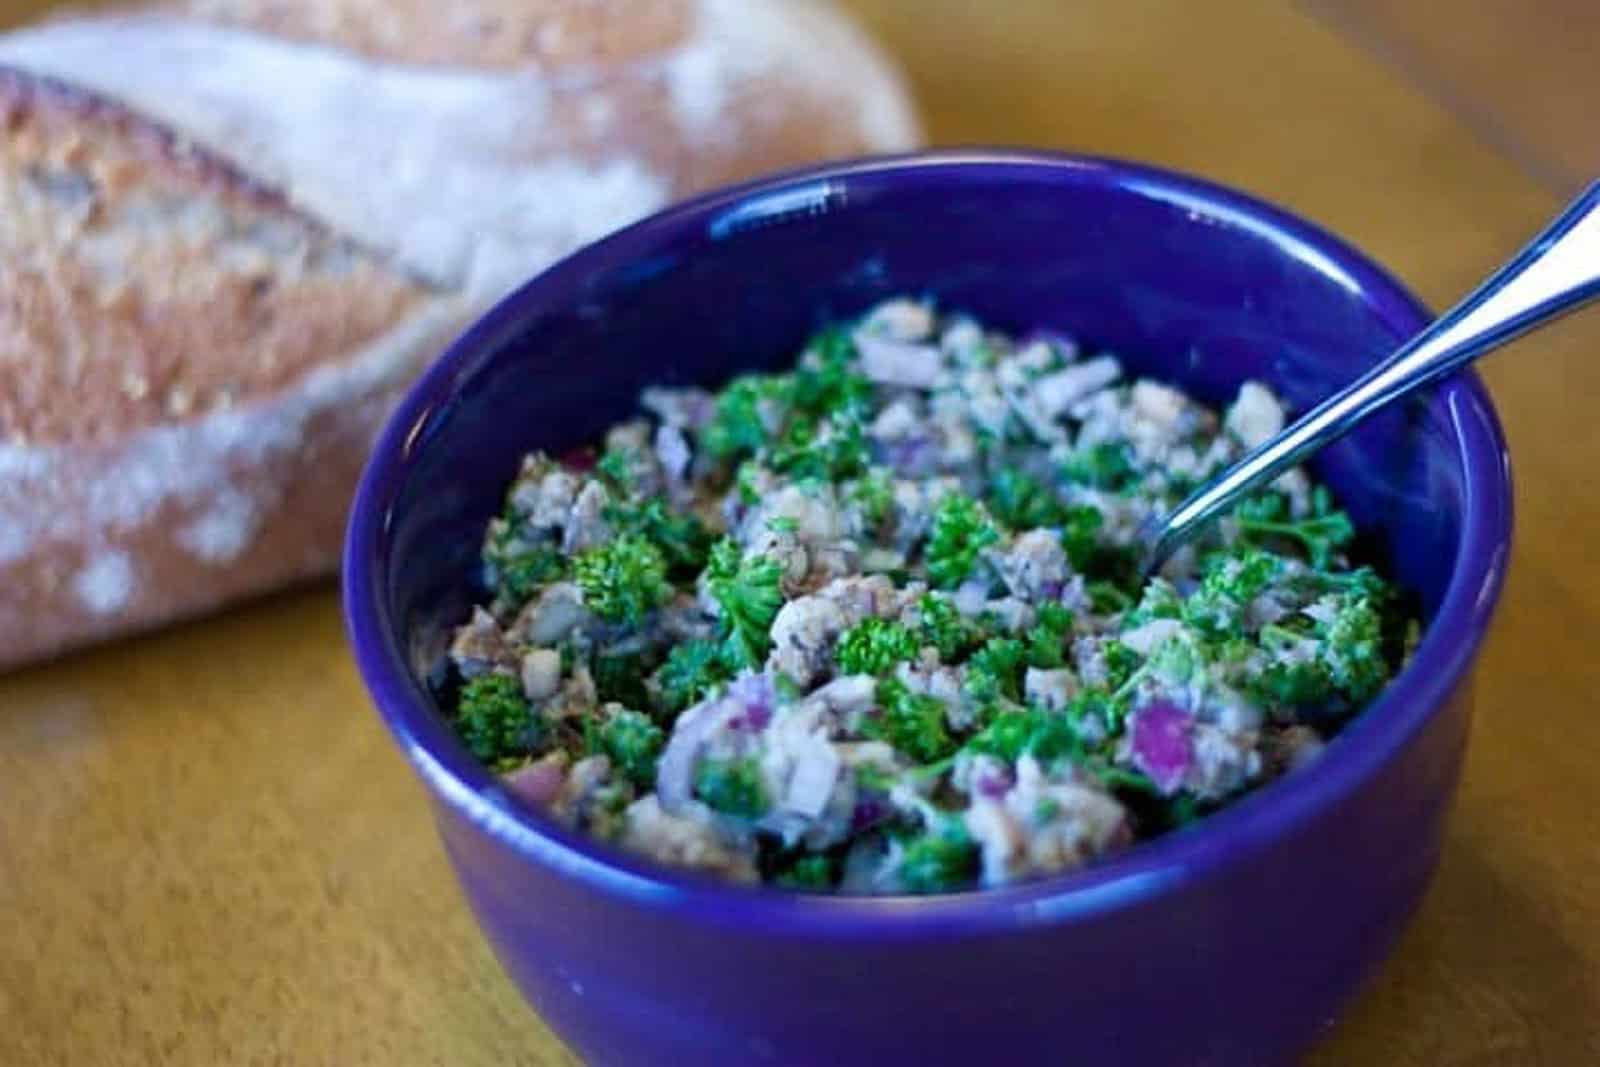 Sardine salad in a blue bowl with bread on the side.